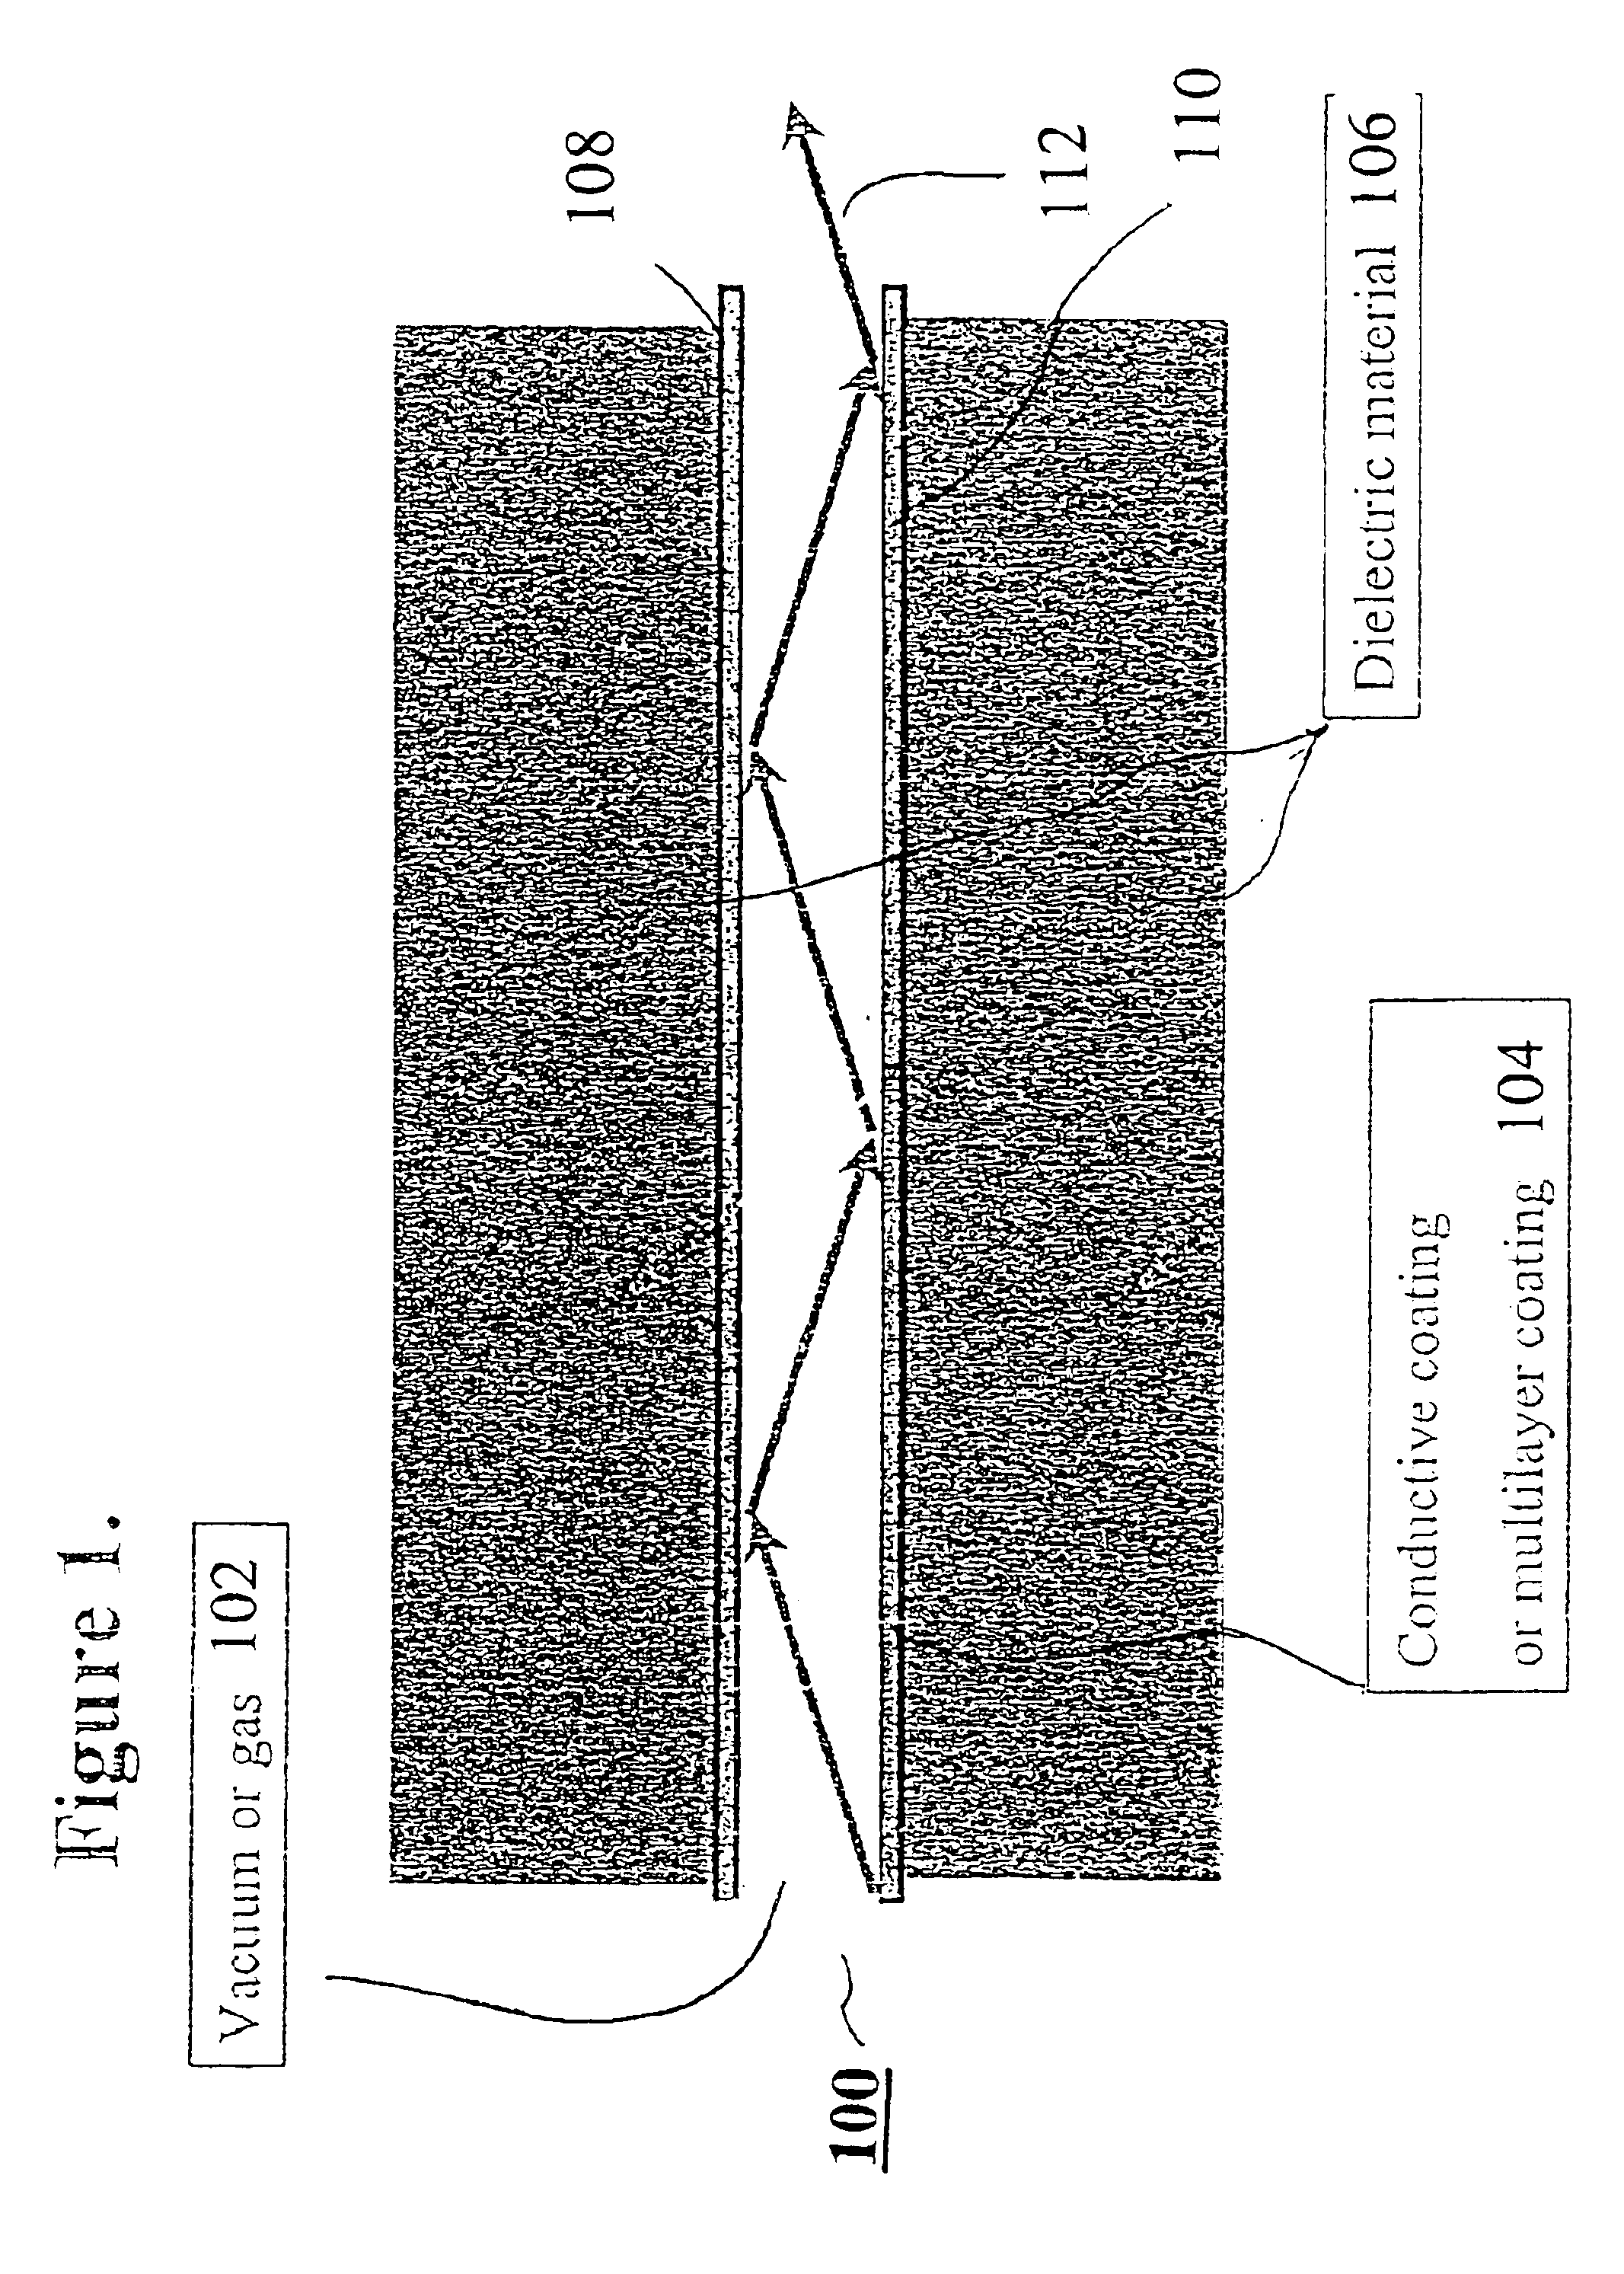 Optical switching system based on hollow waveguides